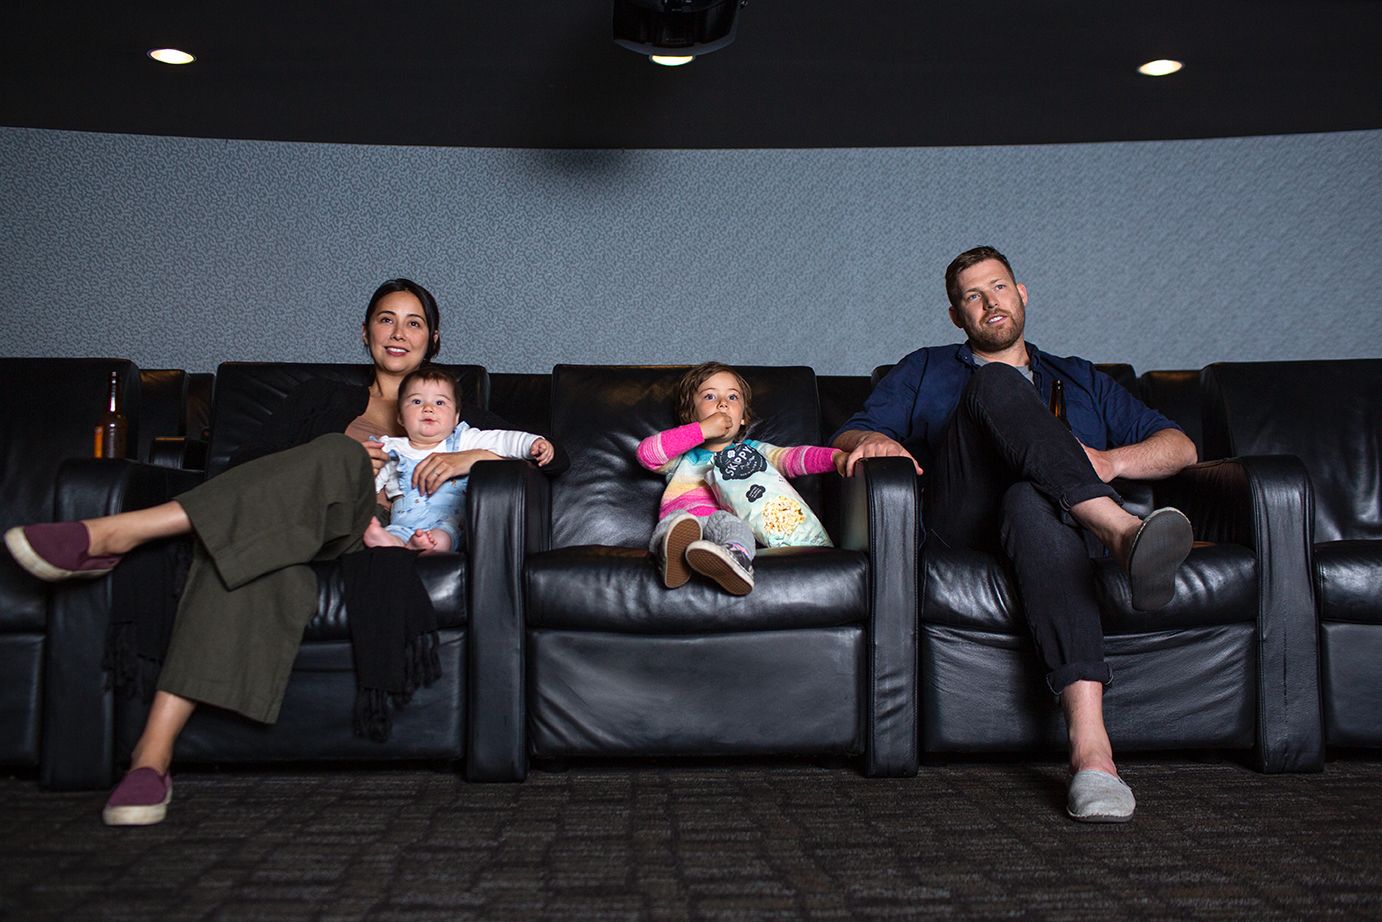 A Man And Woman With Two Children On A Couch